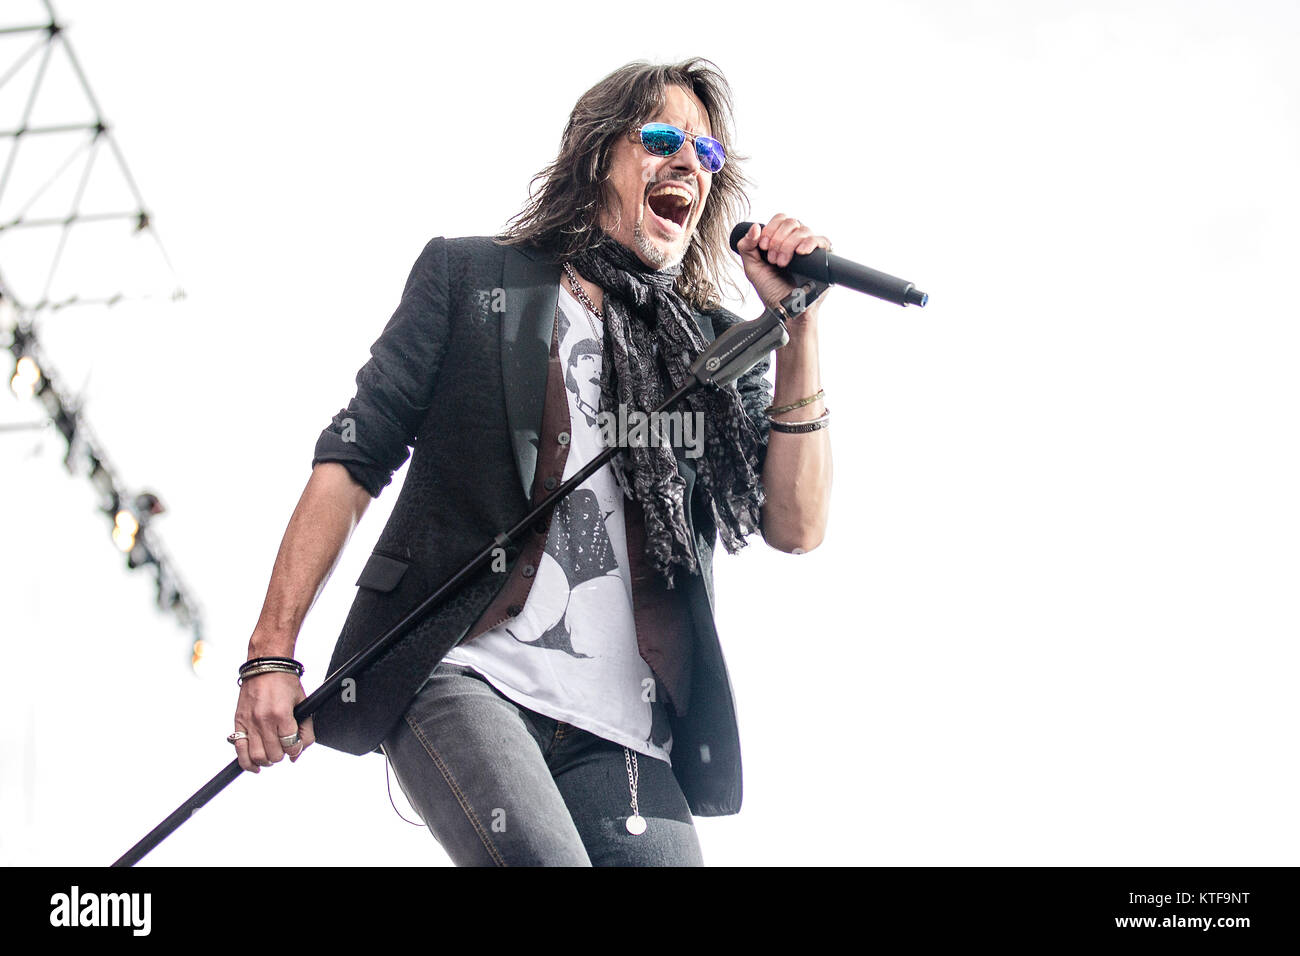 The British-American hard rock band Foreigner performs a live concert at the Sweden Rock Festival 2016. Here vocalist Kelly Hansen is seen live on stage. Sweden, 10/06 2016. Stock Photo